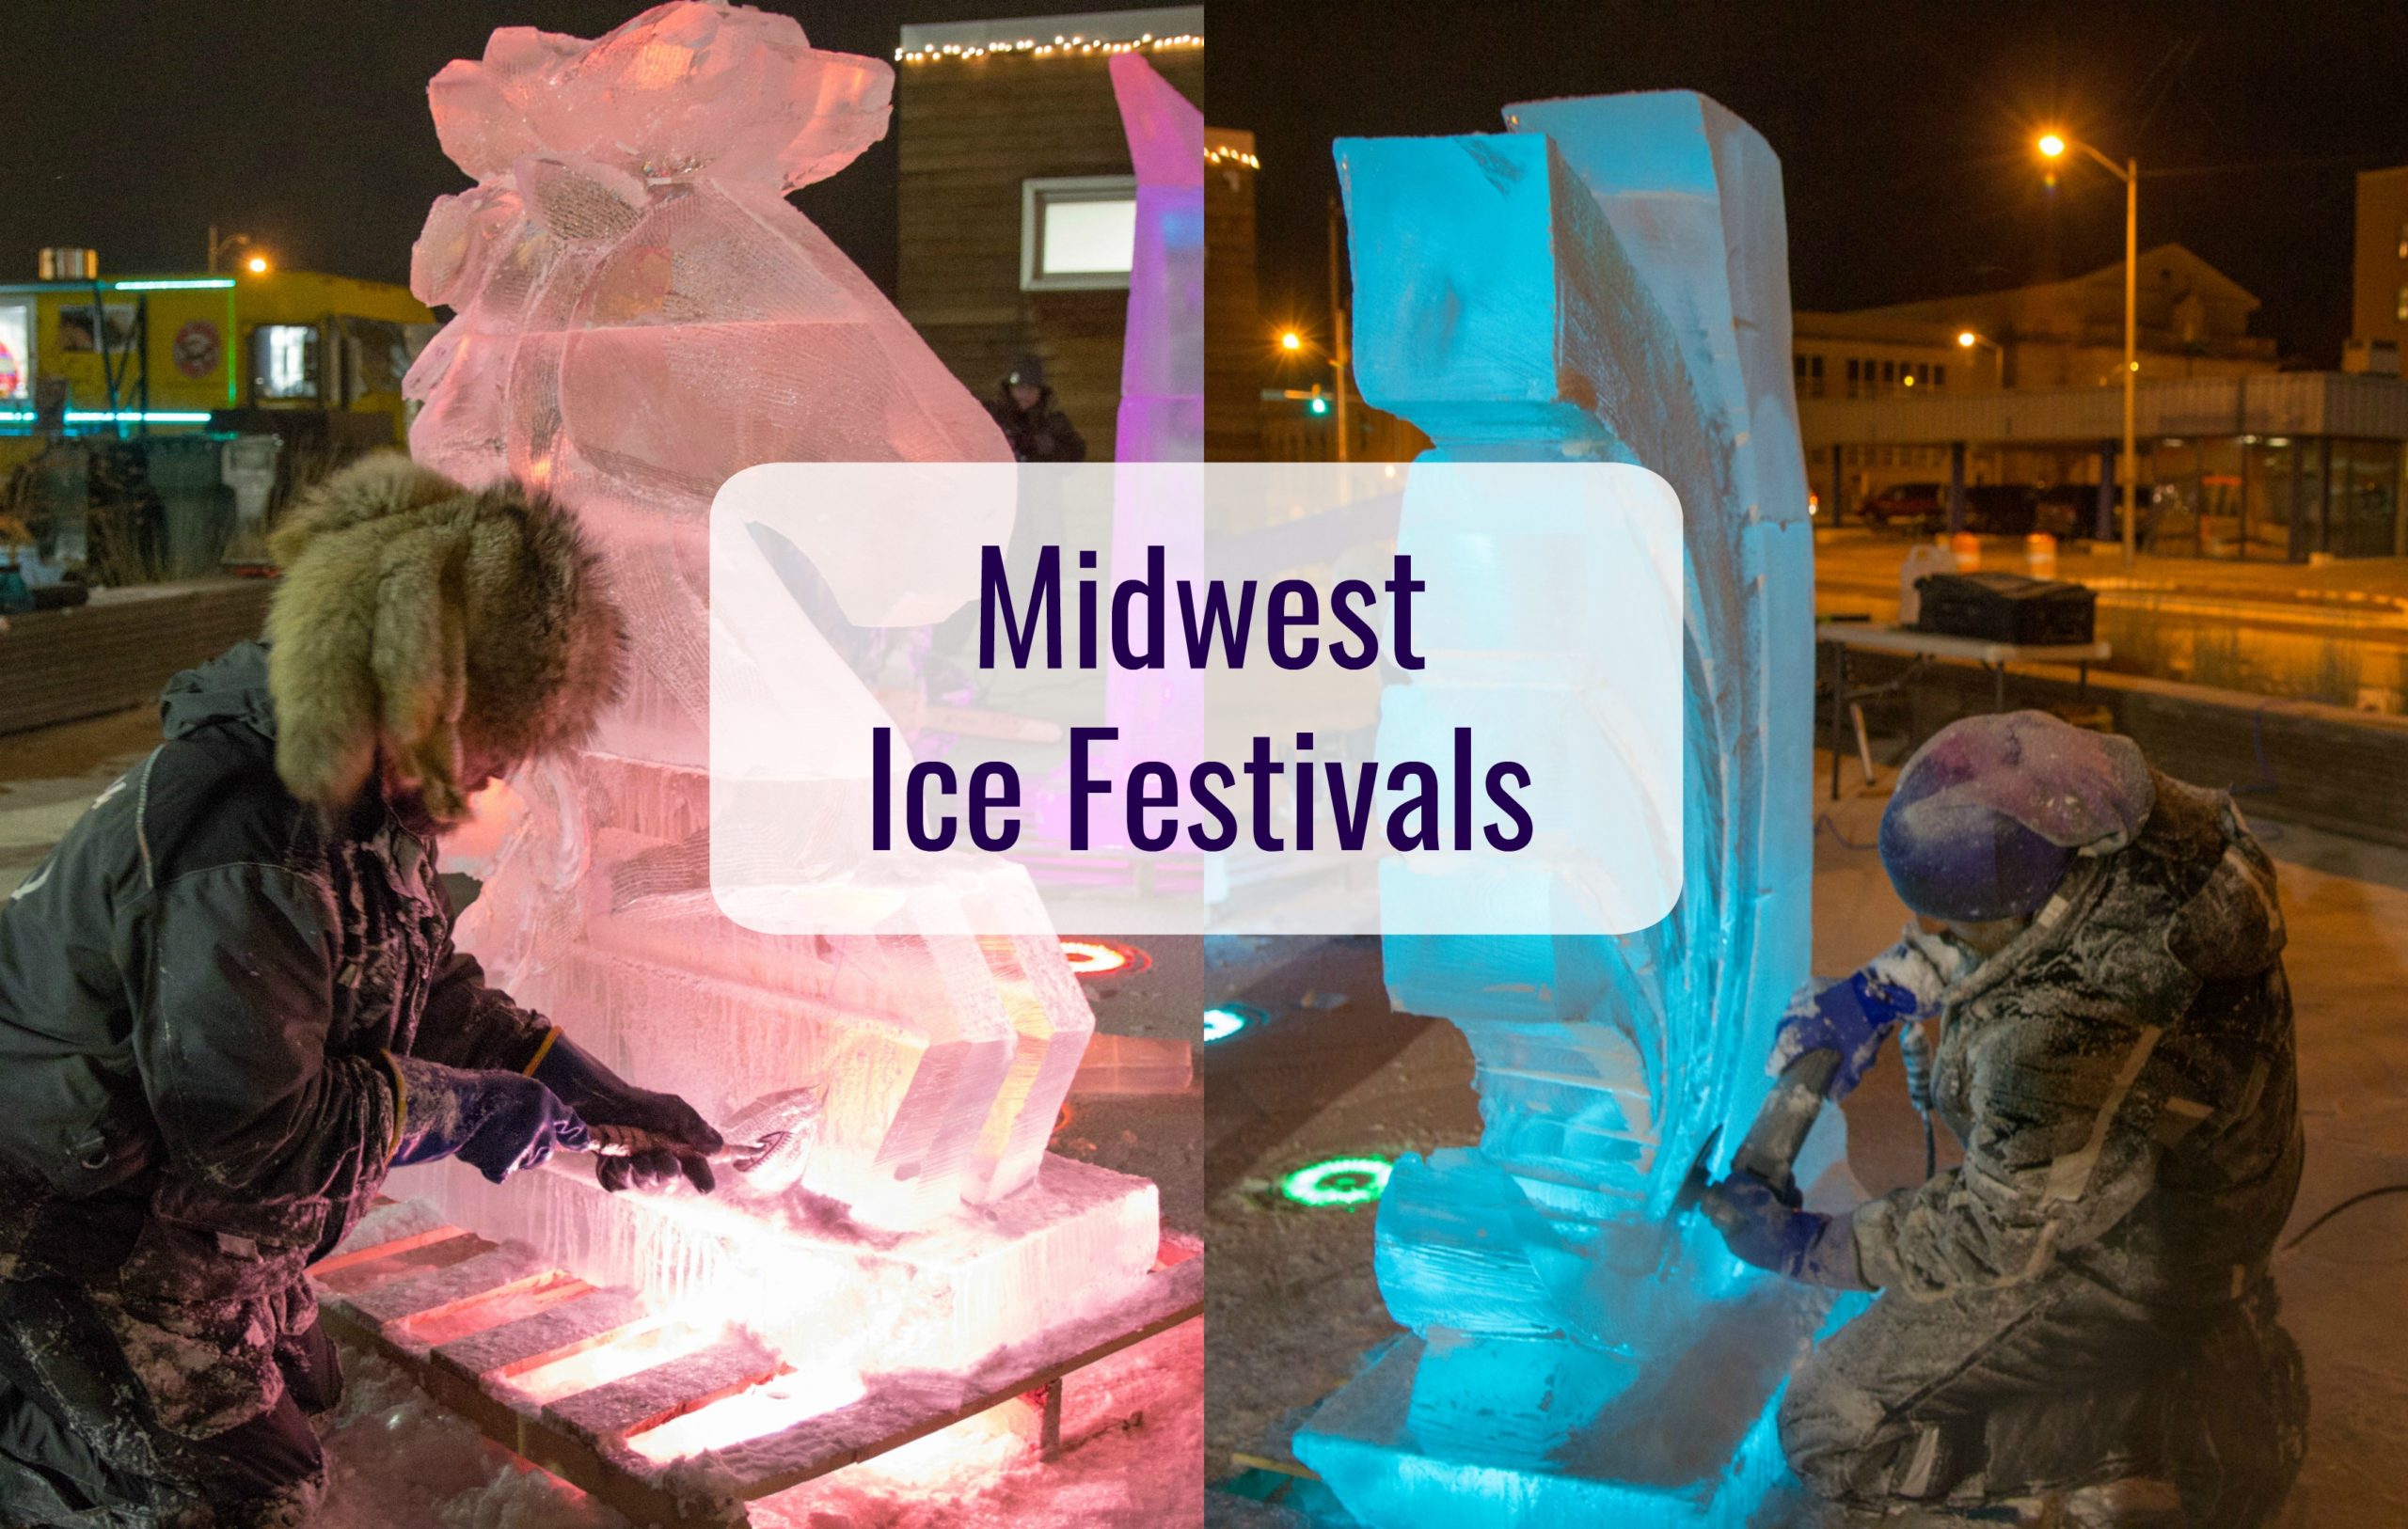 Warm Up to Winter at Midwest Ice Festivals